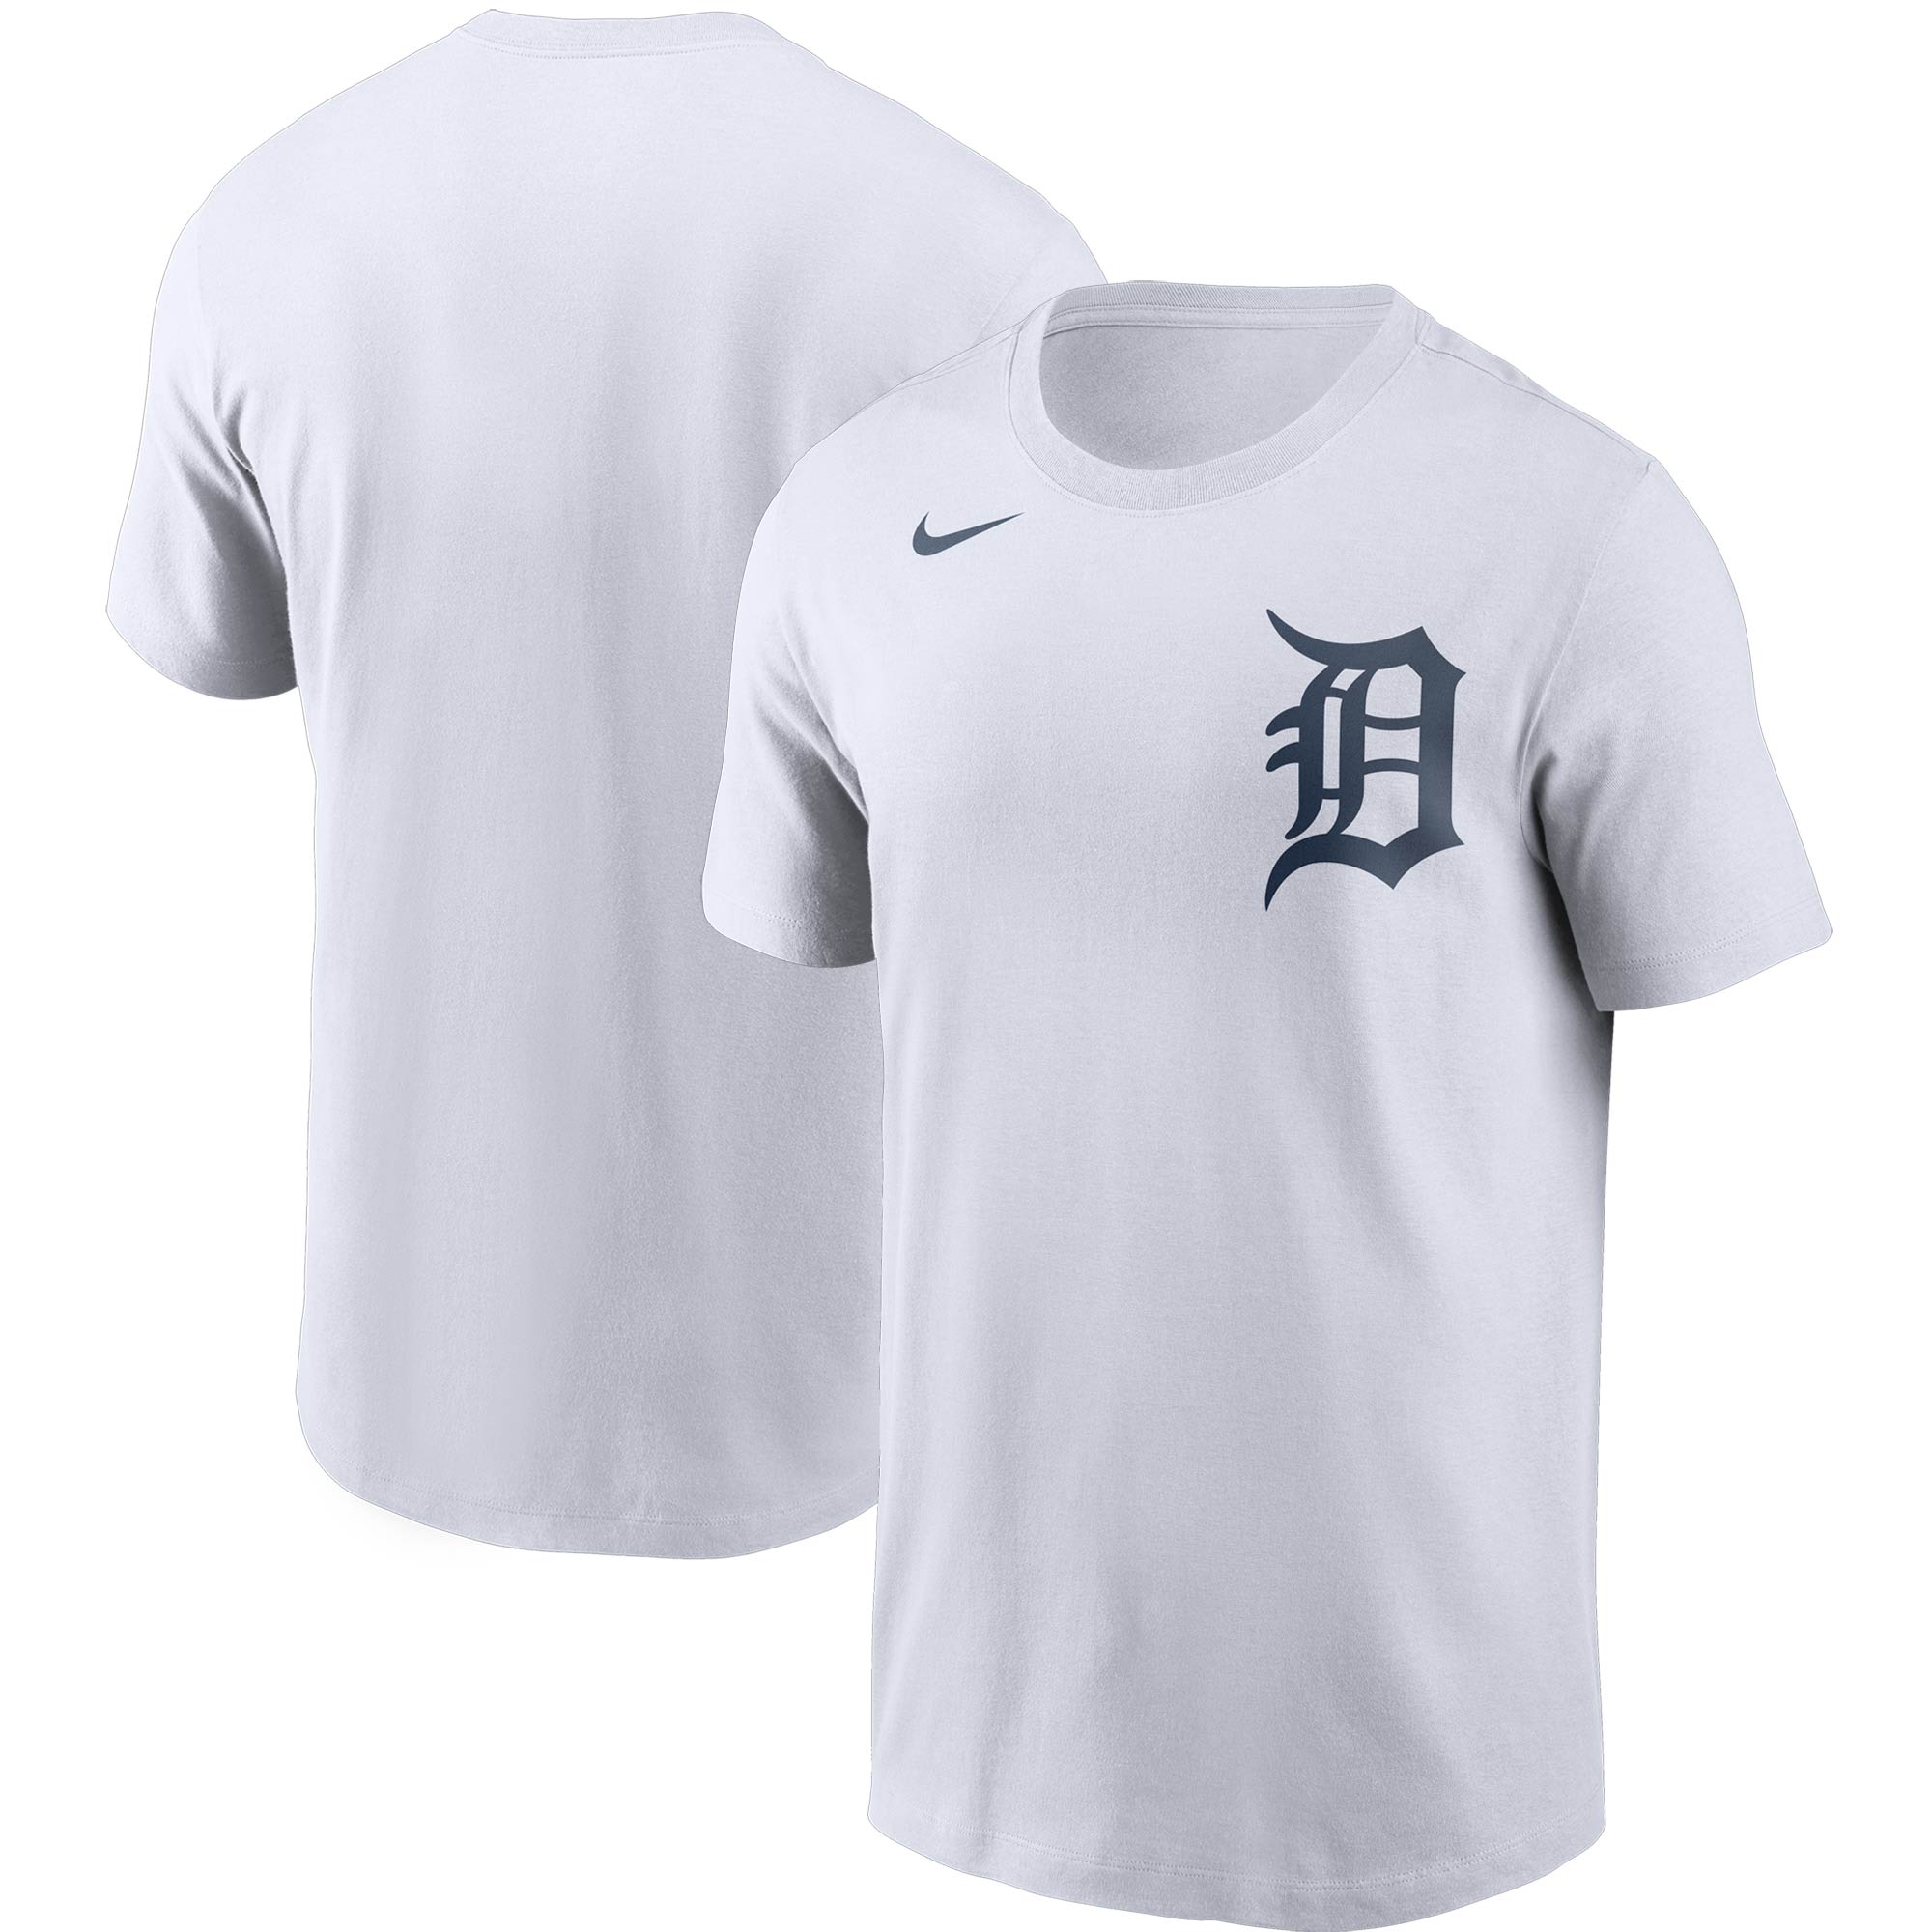 Summer must-haves for the Detroit Tigers fan